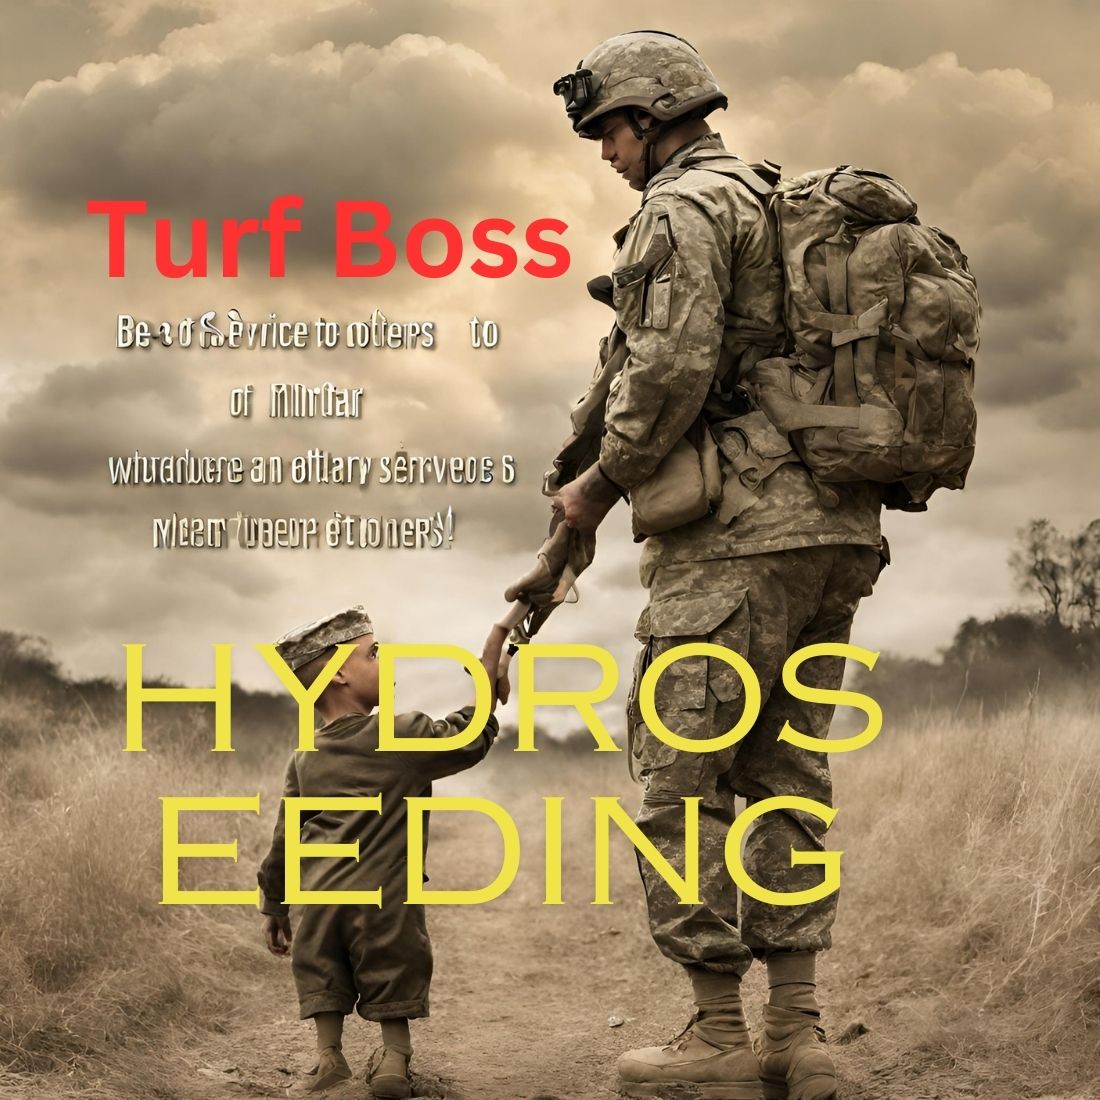 Turf Boss and Hydro Seeding preview image.